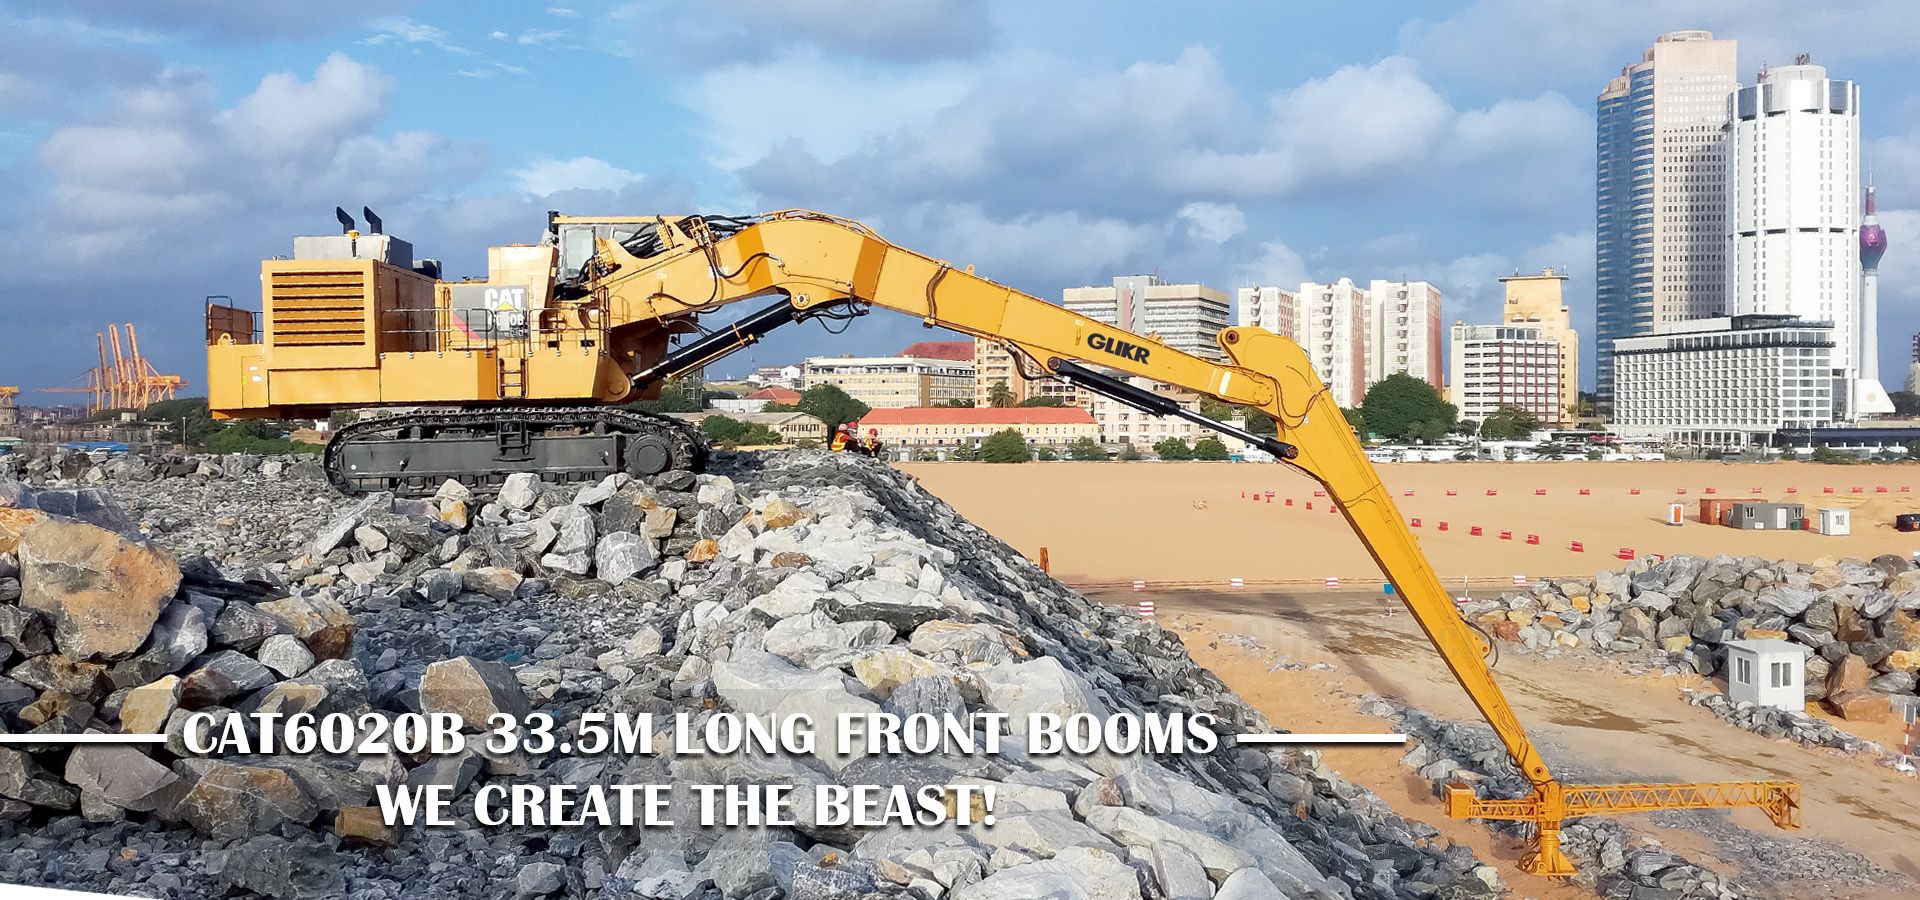 CAT6020B 33.5M LONG FRONT BOOMS - WE CREATE THE BEAST!